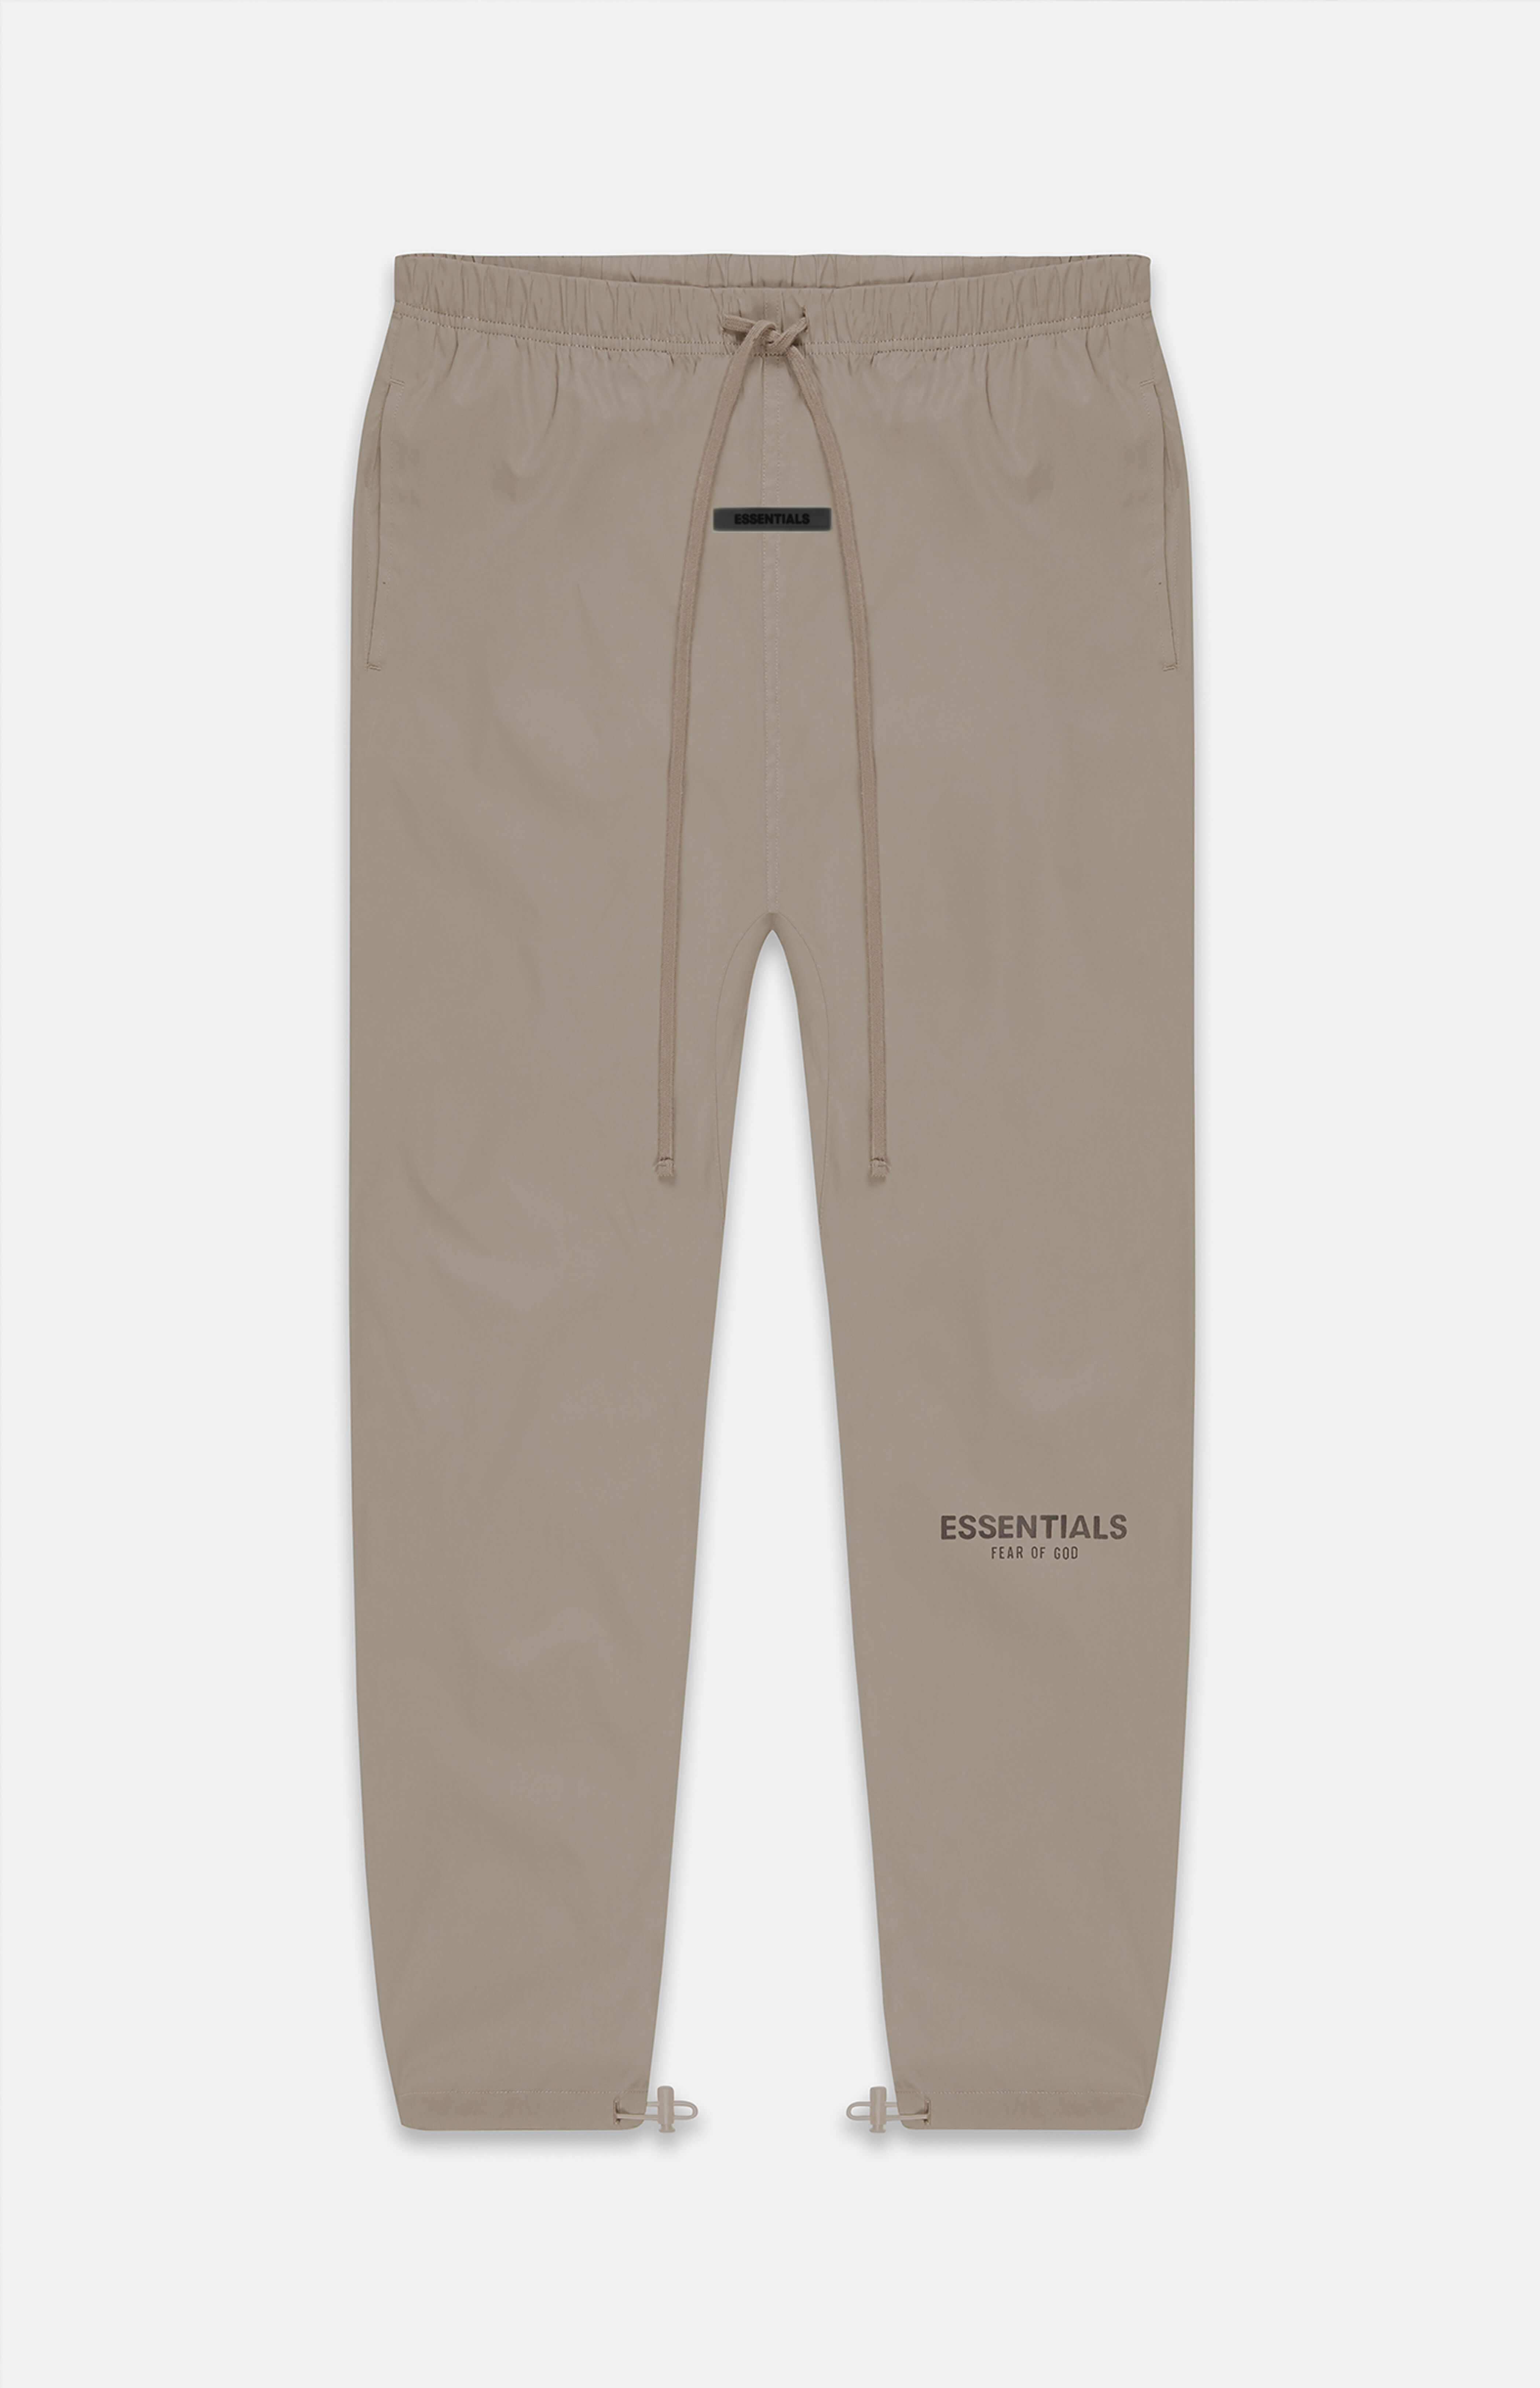 FOG - Fear Of God Essentials Taupe Track Pants | PacSun